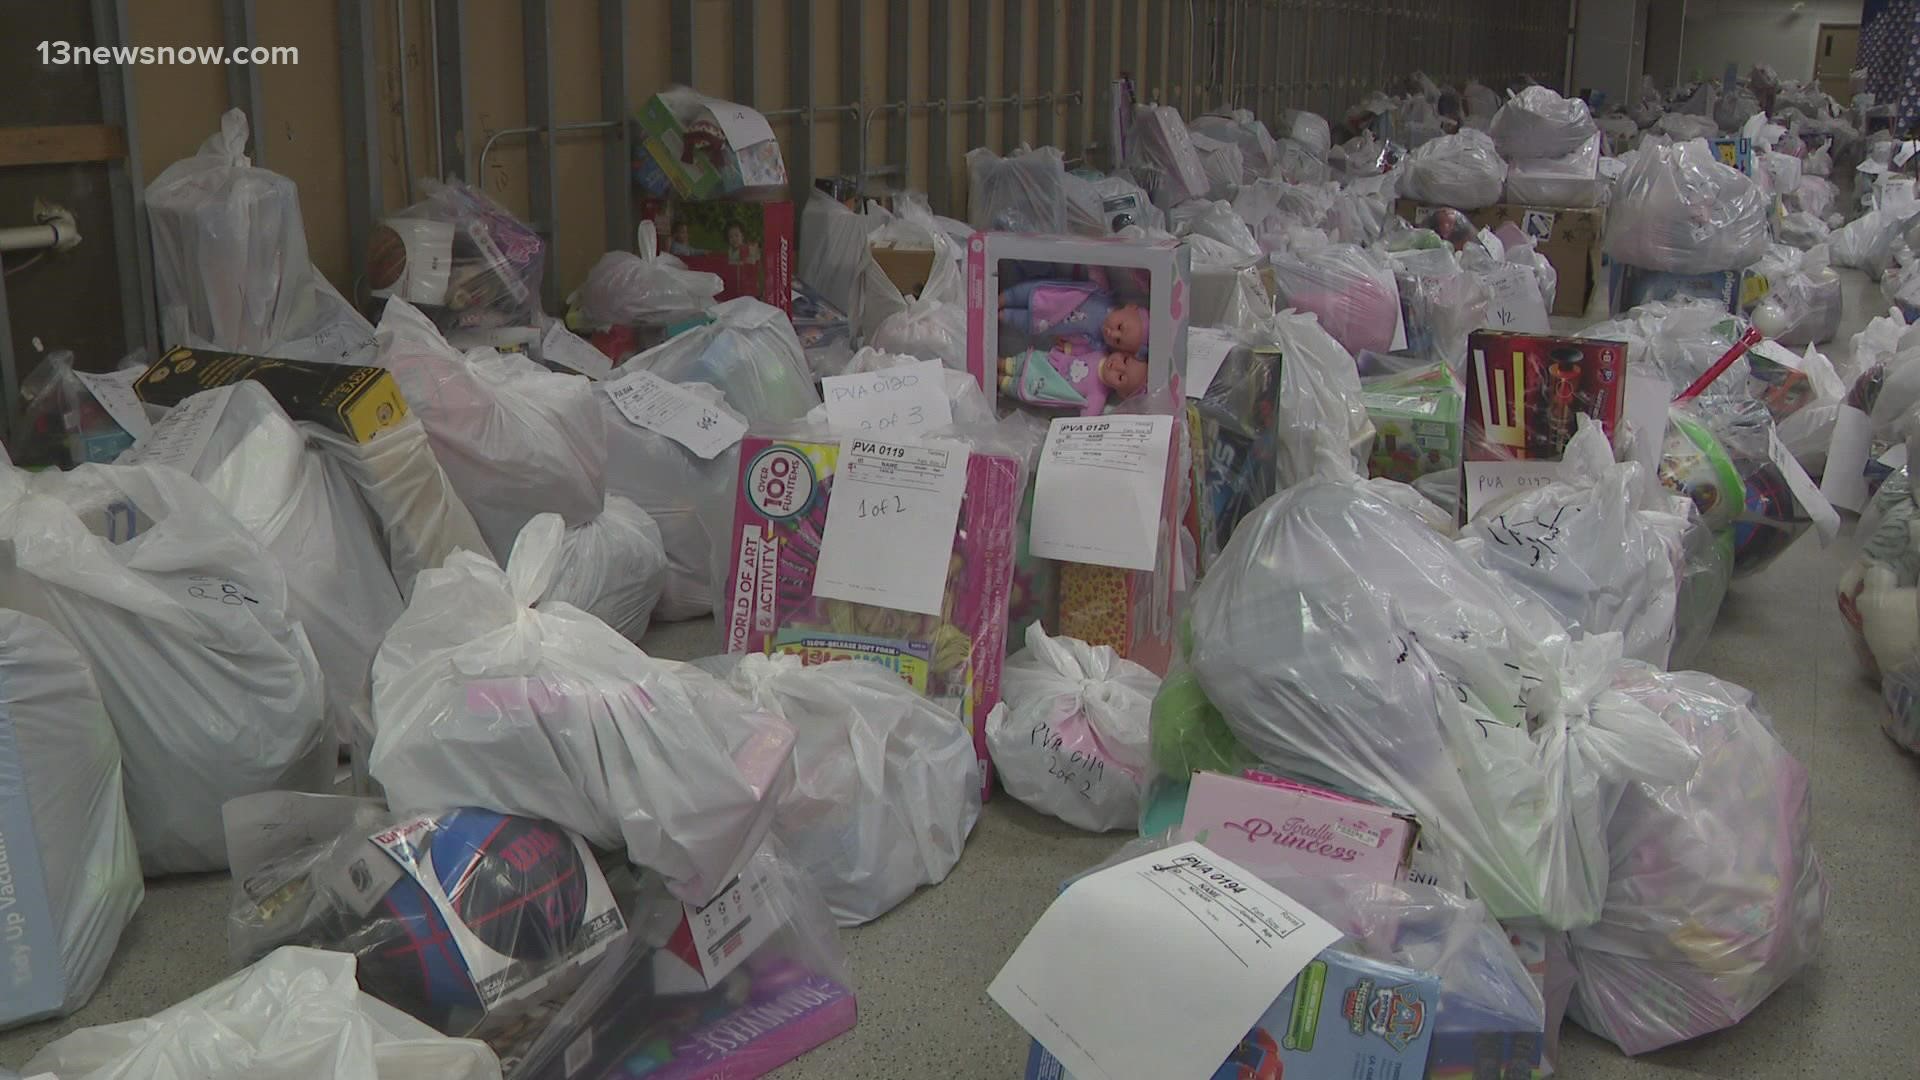 For weeks, Salvation Army volunteers packed bags with toys and clothing for families in need.